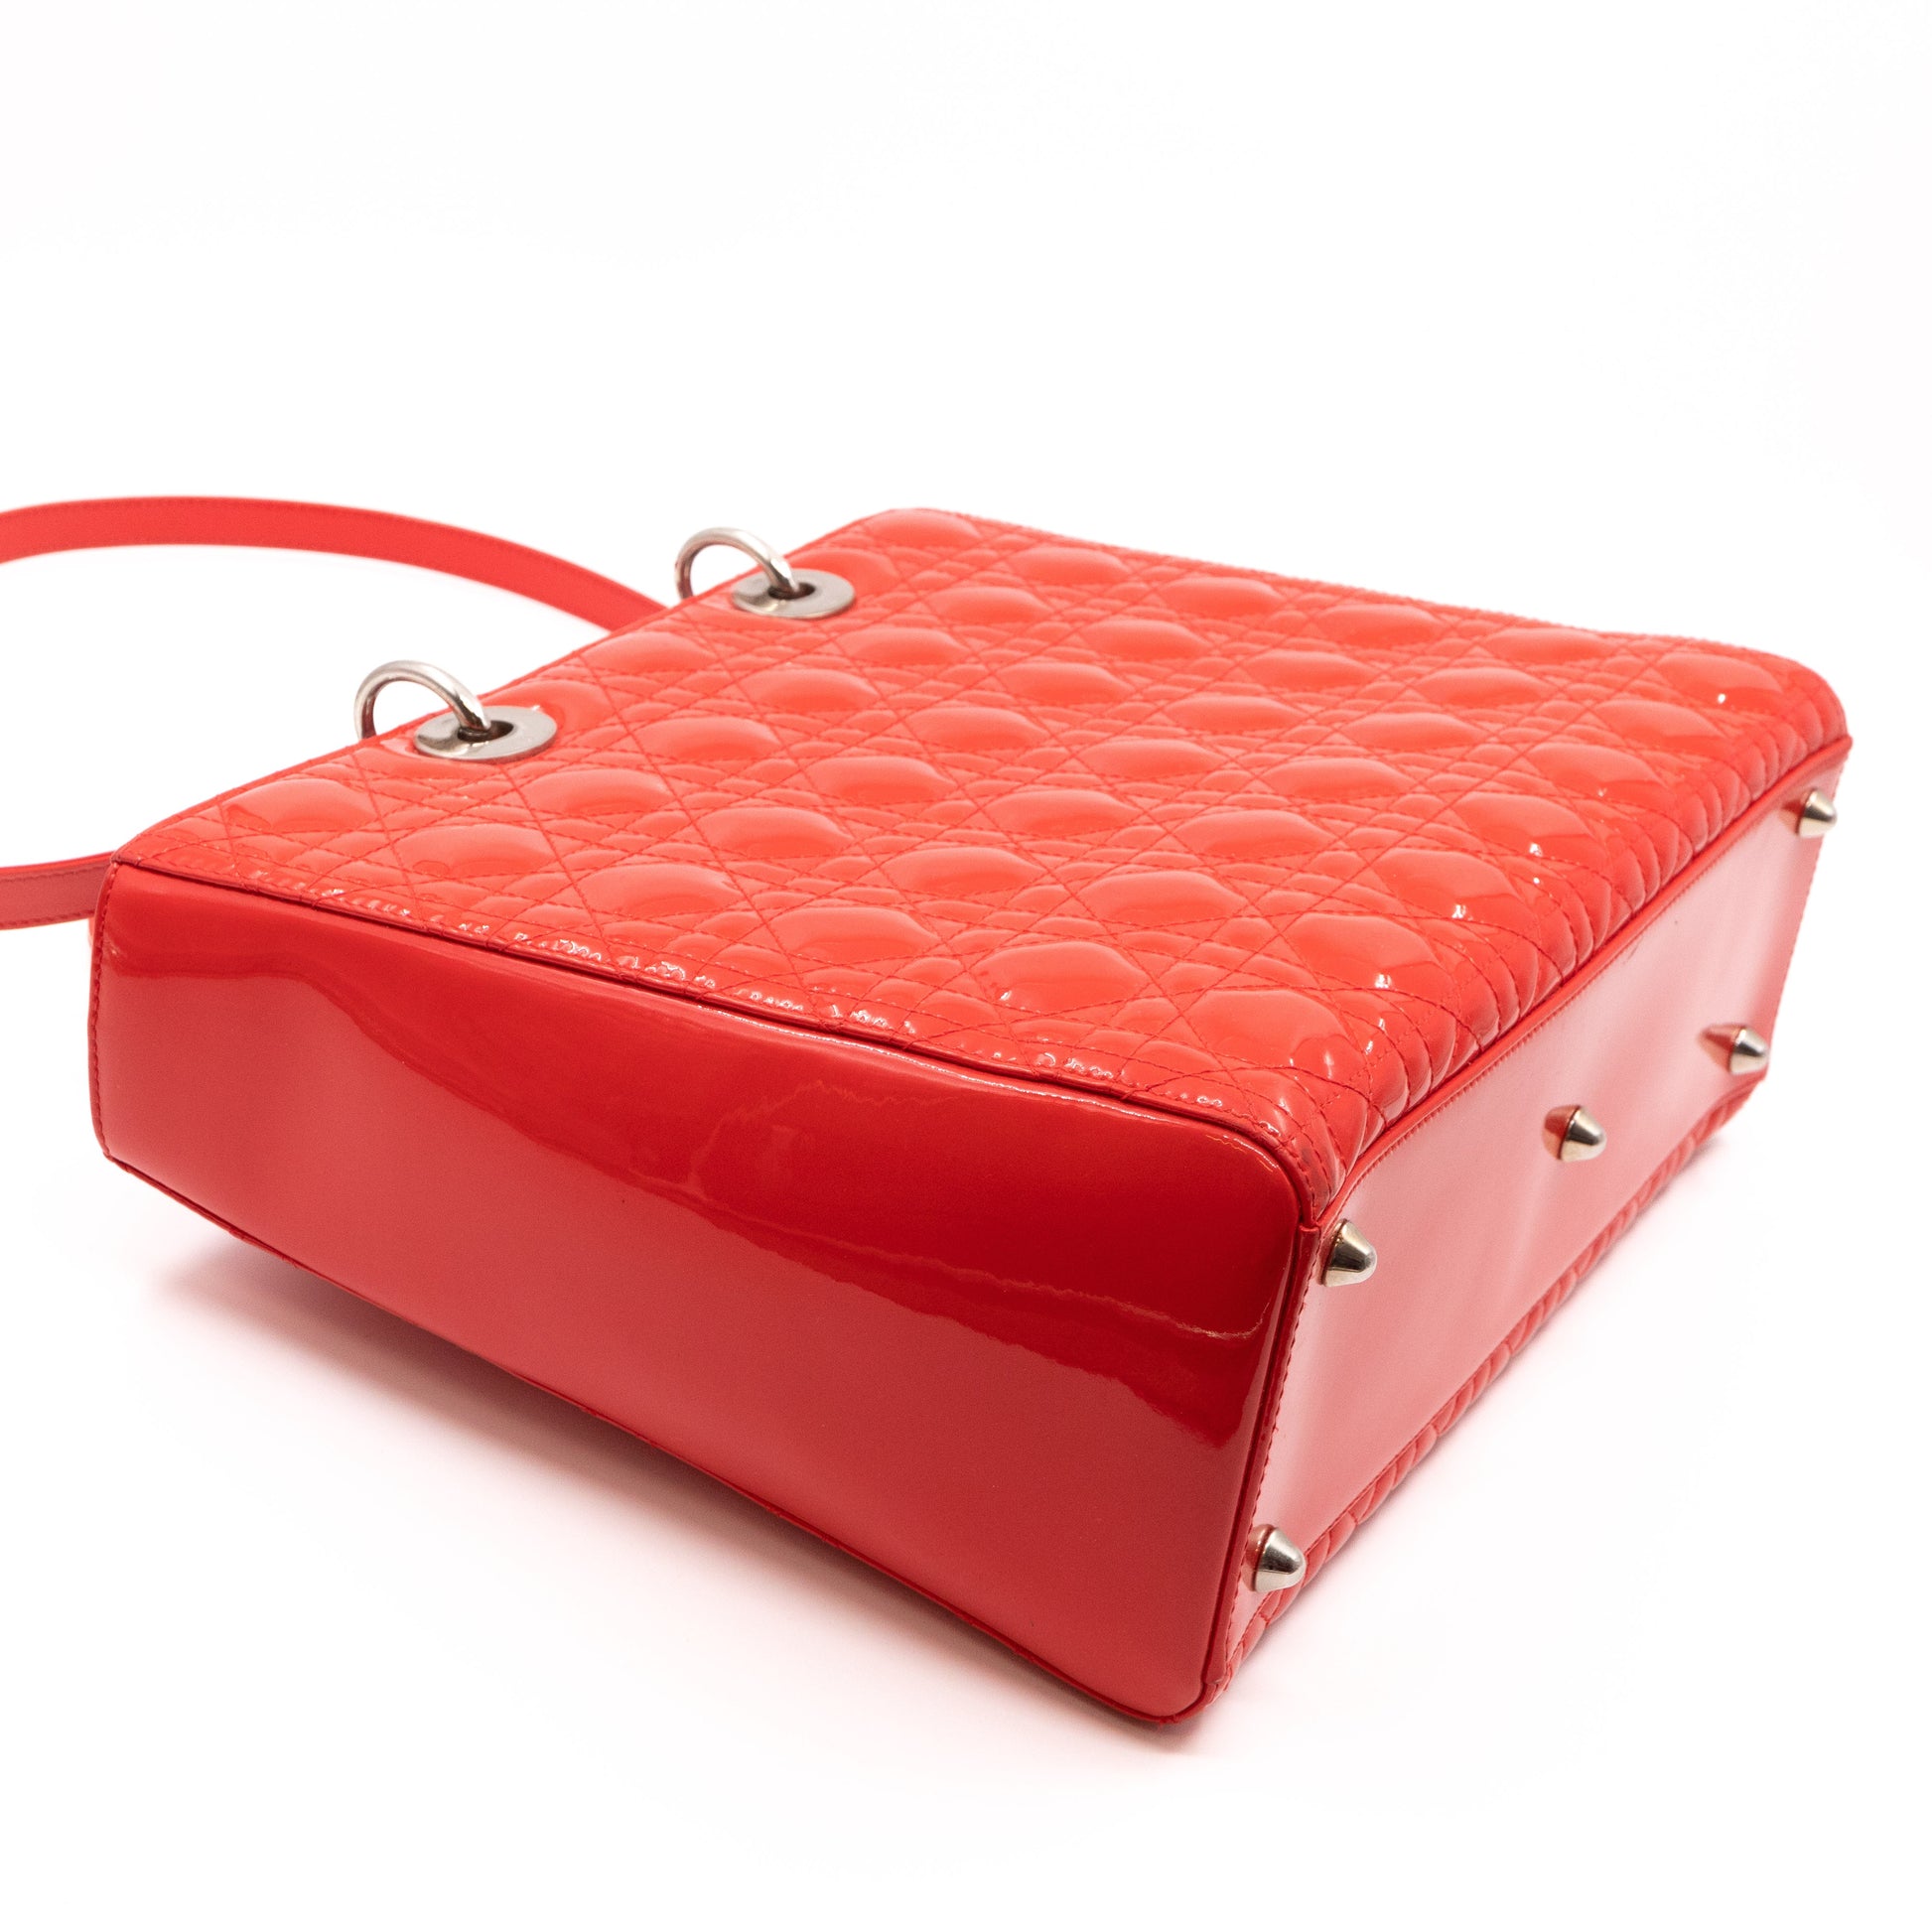 Christian Dior Large Lady Bag in Coral Patent Leather